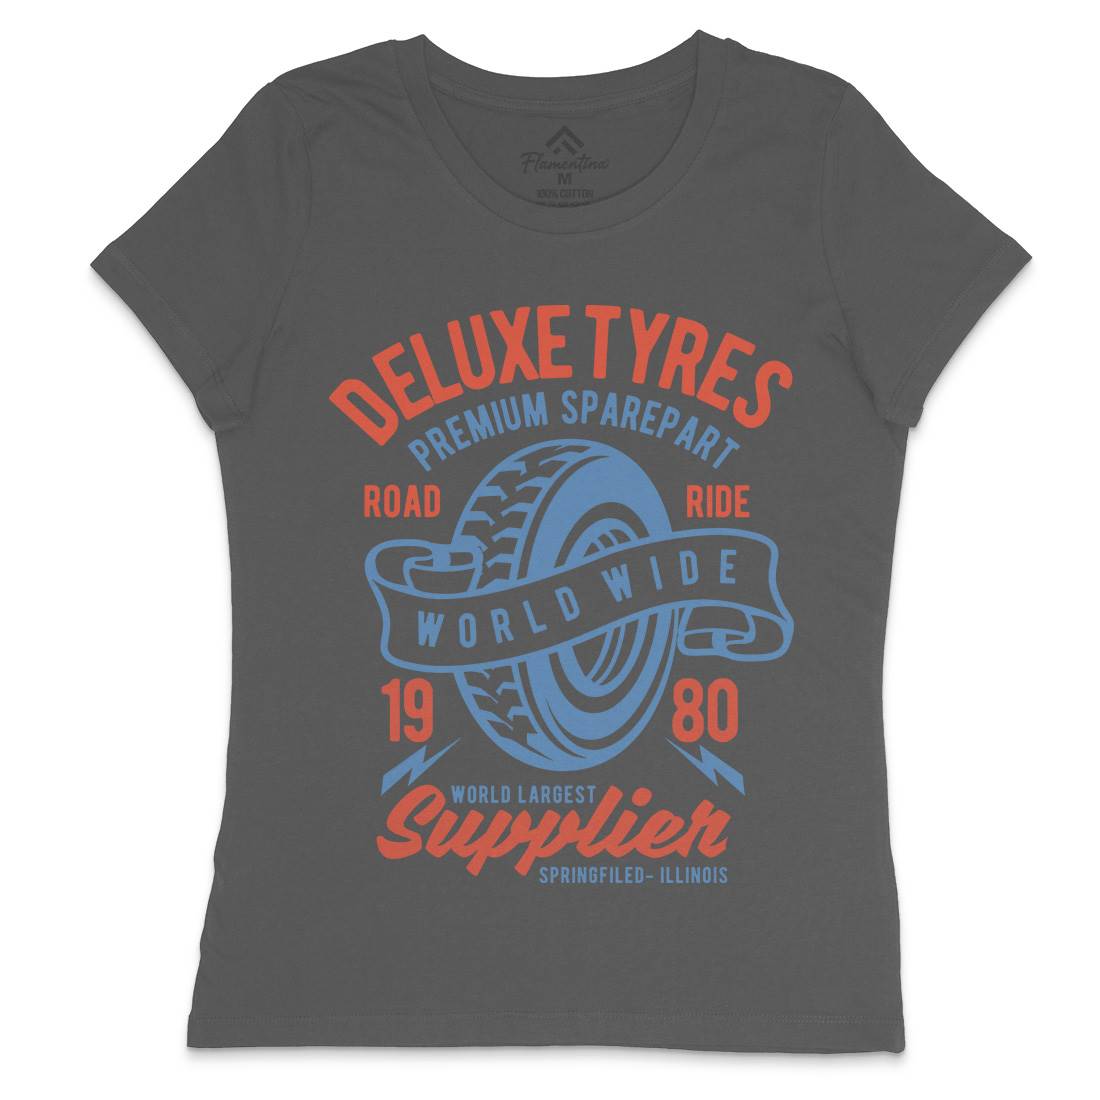 Deluxe Tyres Womens Crew Neck T-Shirt Cars B204